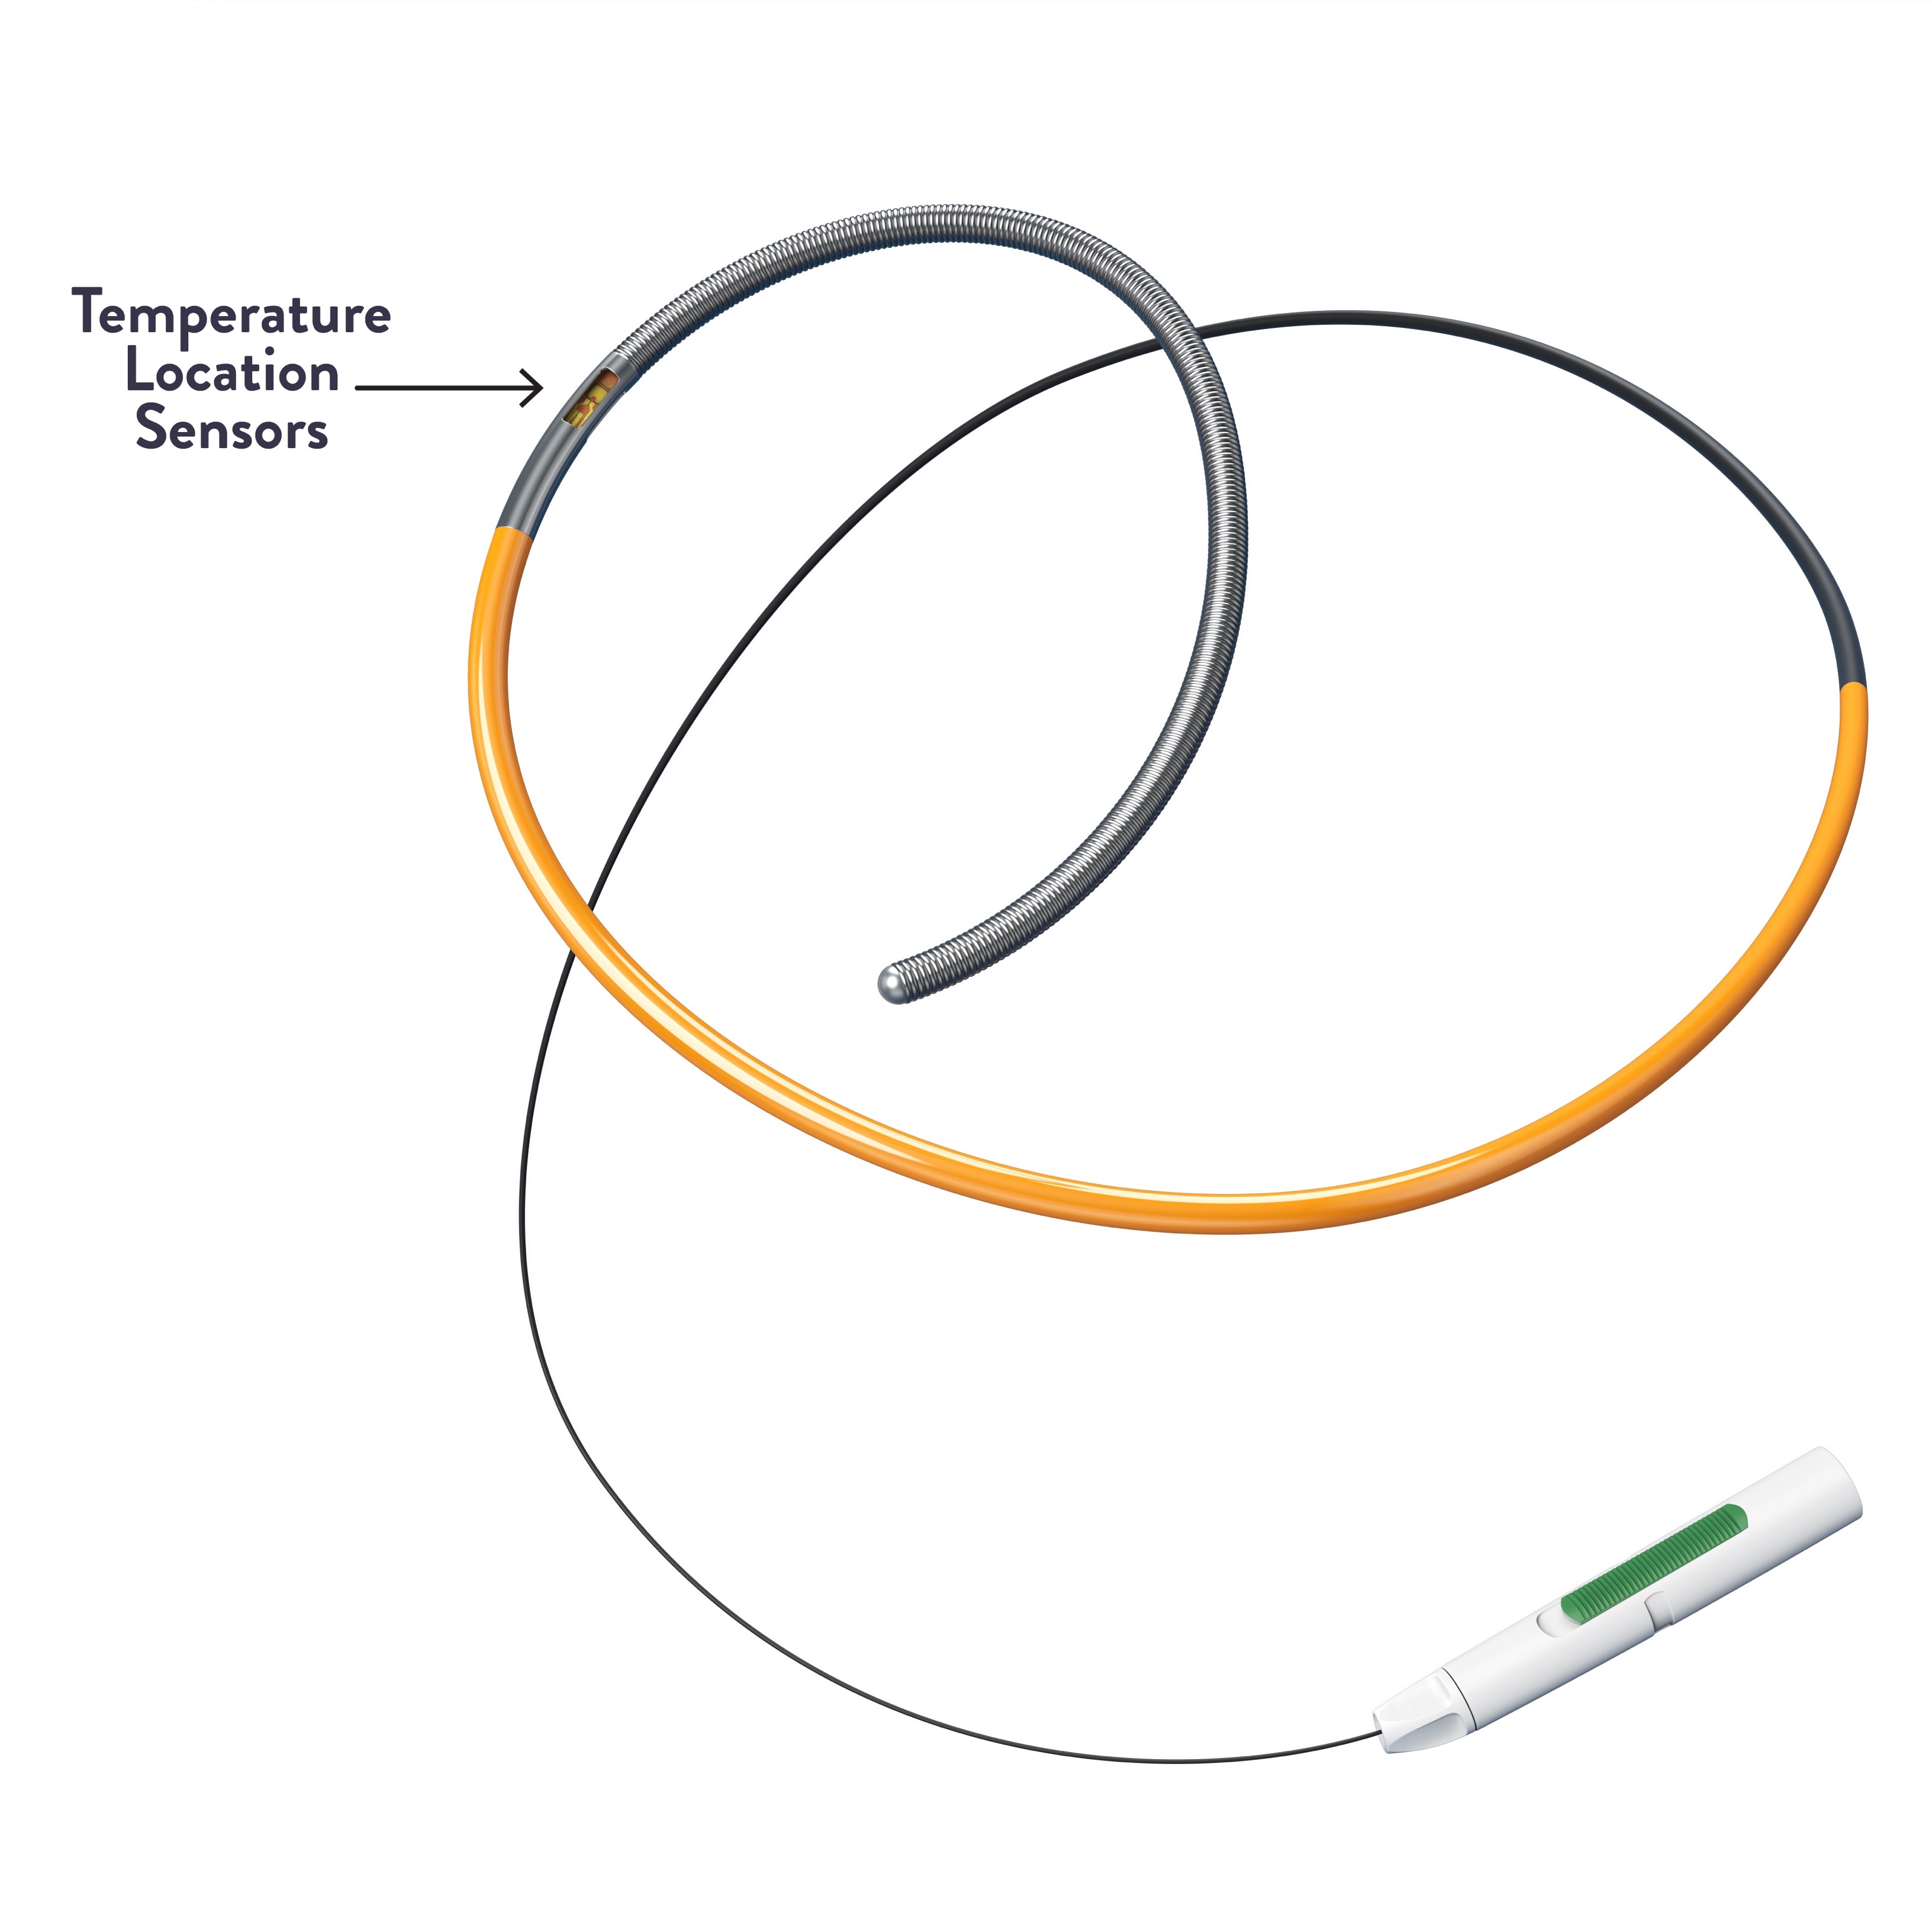 Proximal and distal temperature sensors on PressureWire™ X Guidewire calculate the index of microvascular resistance (IMR) and coronary flow reserve (CFR)